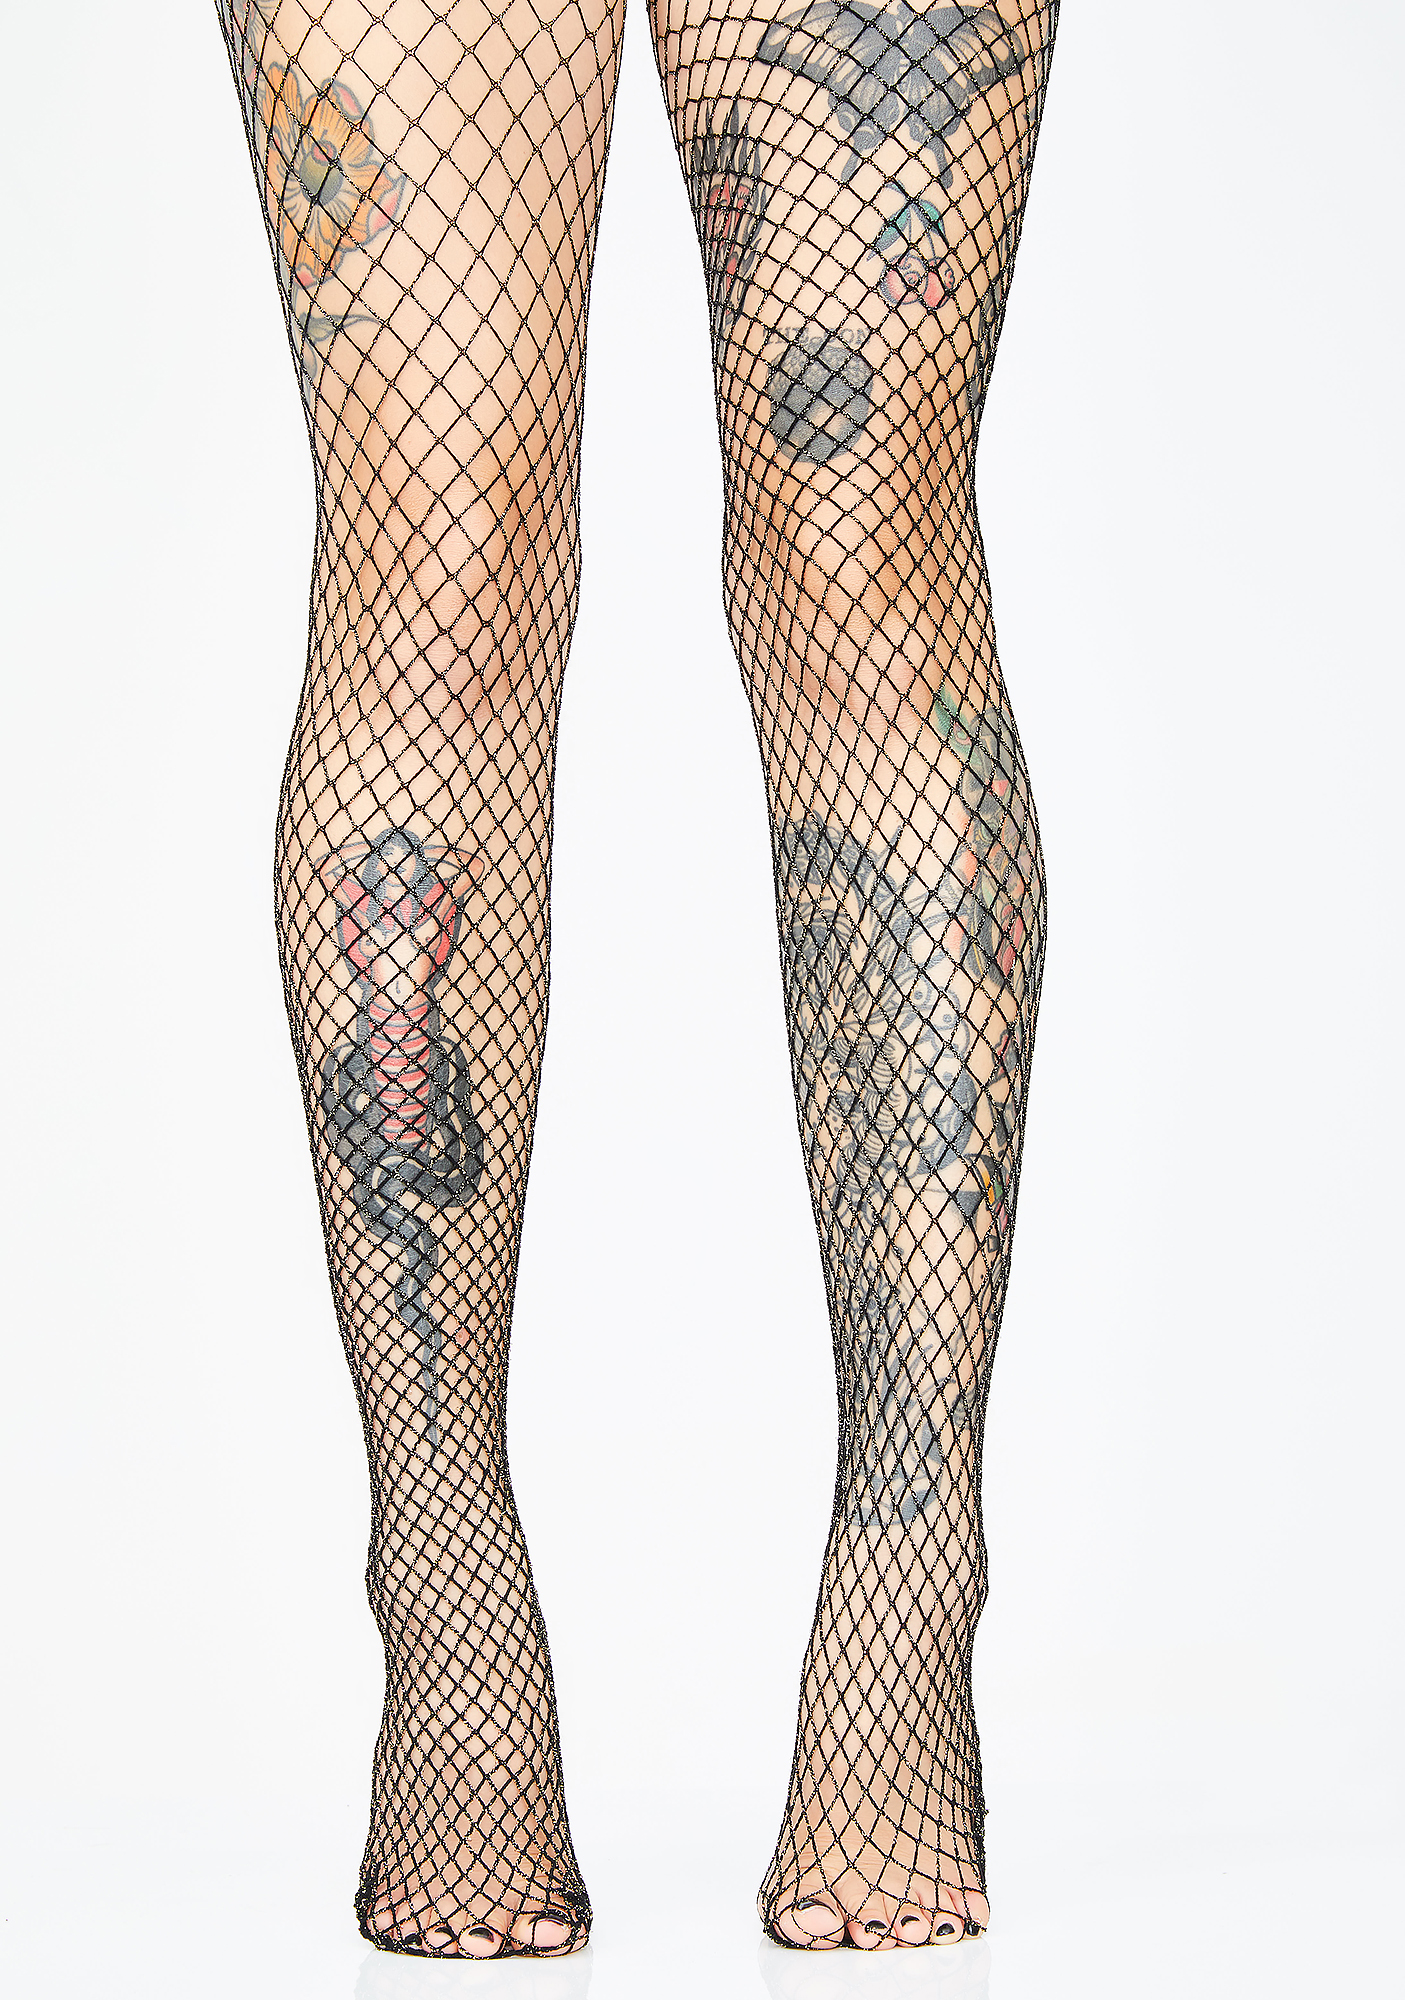 Trasparenze Buttercup Black and Gold Sparkly Net Tights Fishnet Tights 